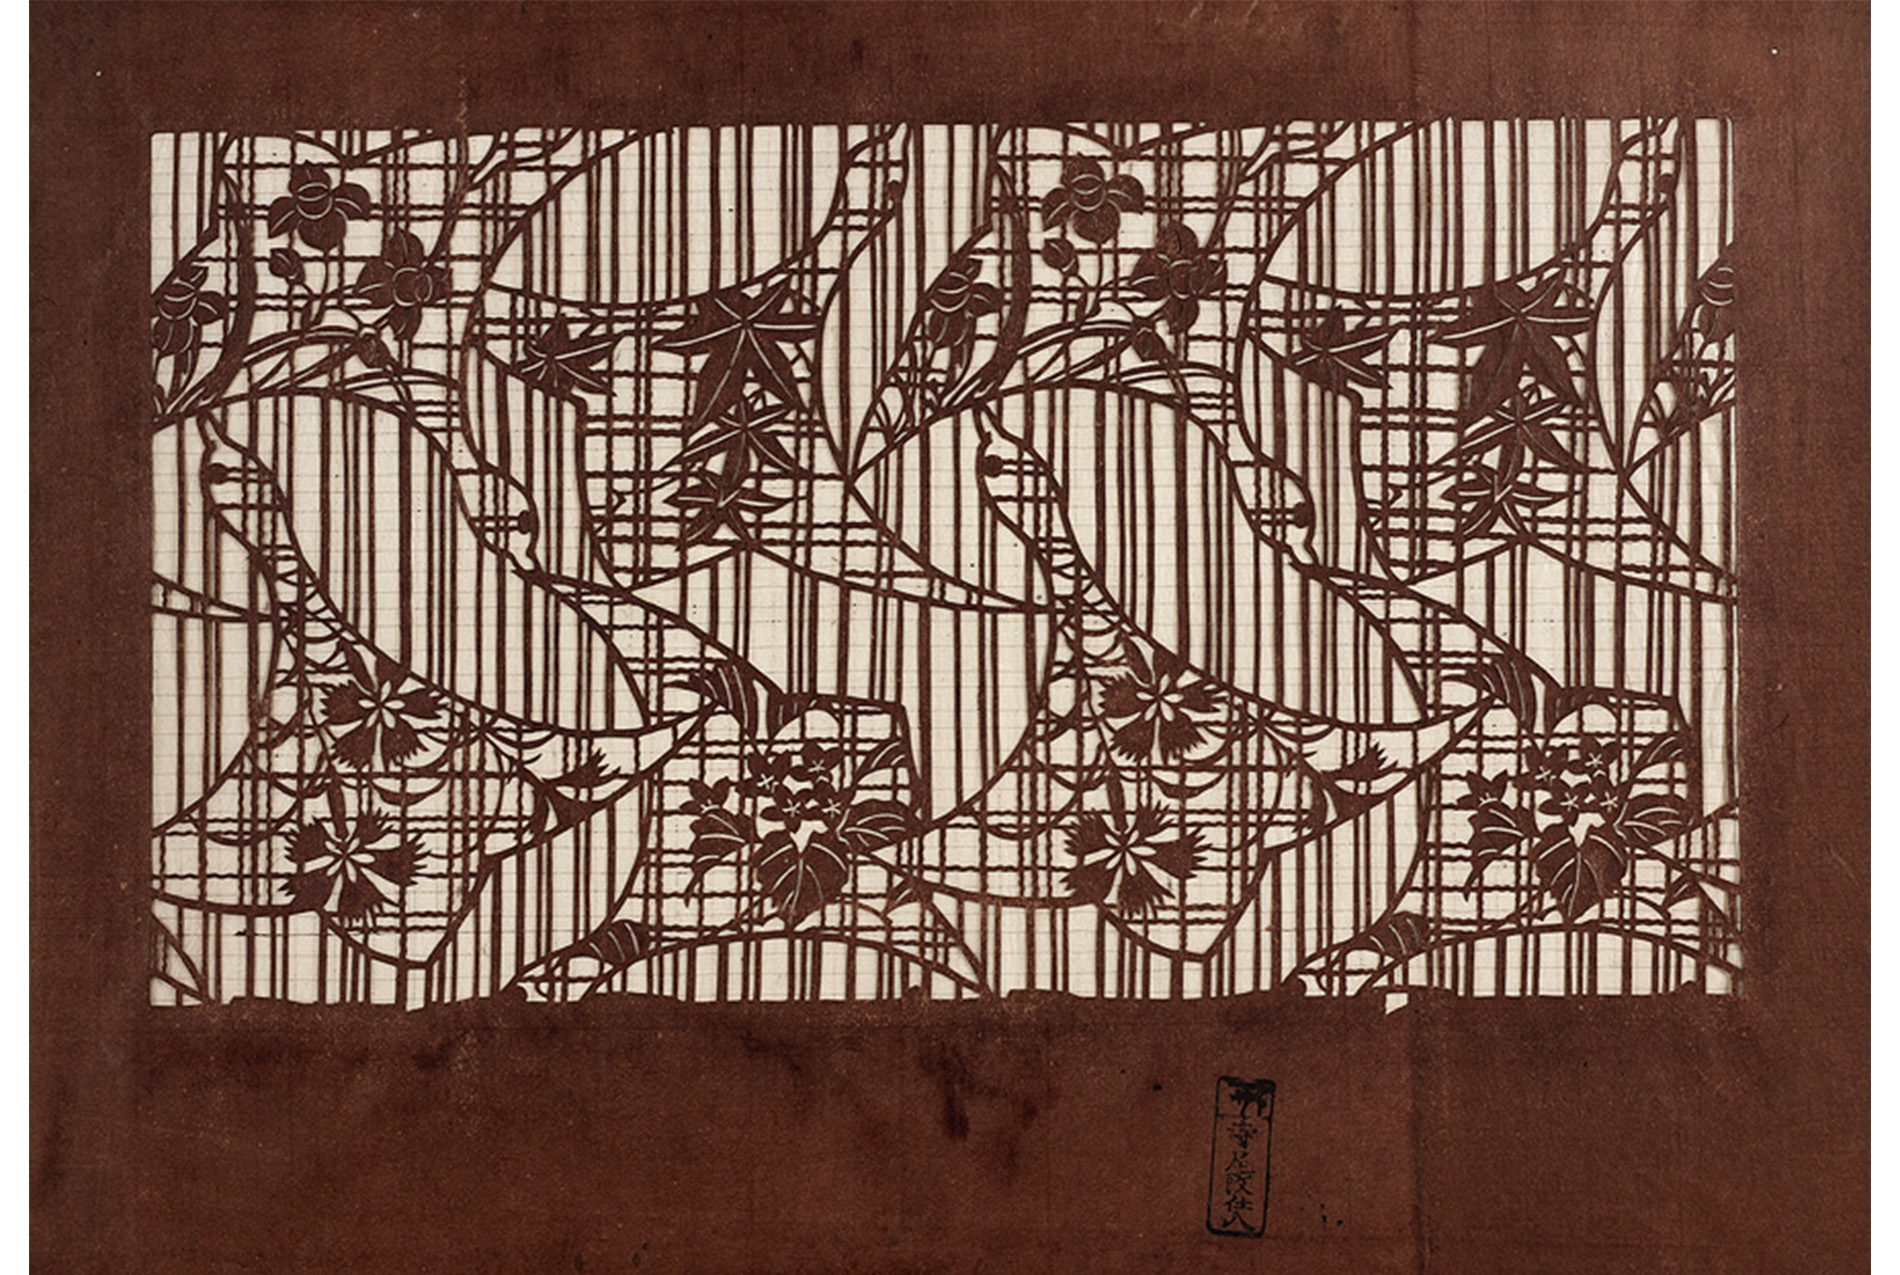 eight birds decorated with bamboo or flowers flying against a stripped background.